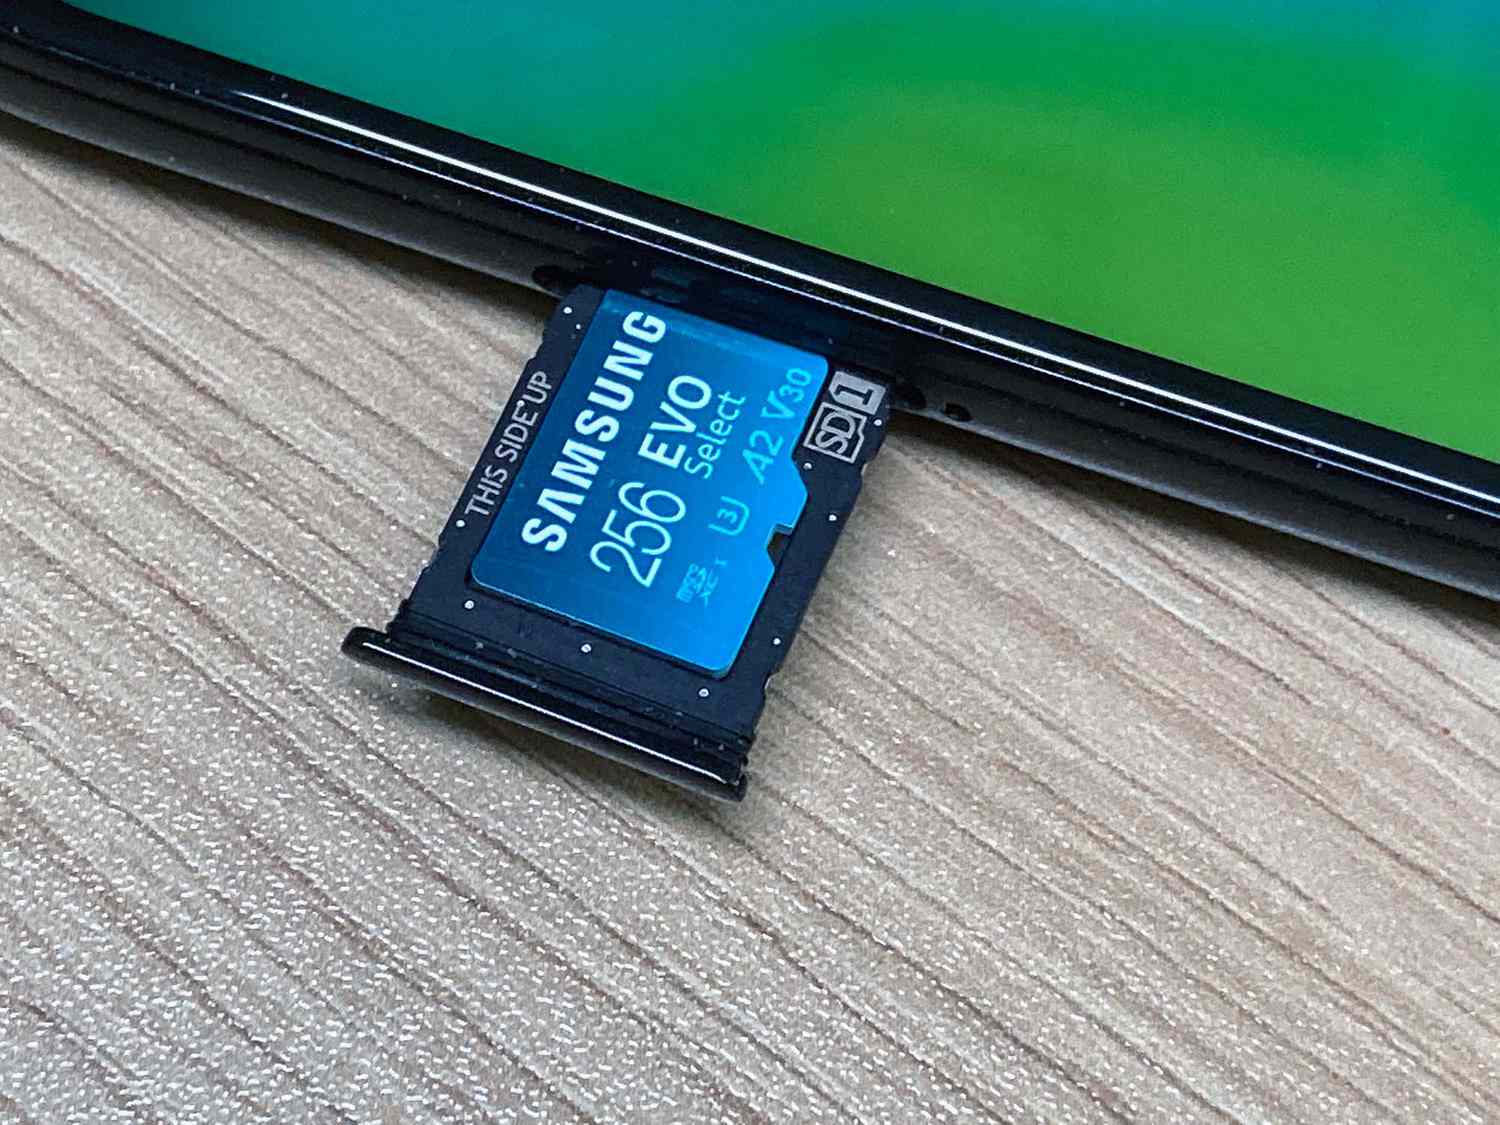 How To Use Sd Card On Samsung Tablet